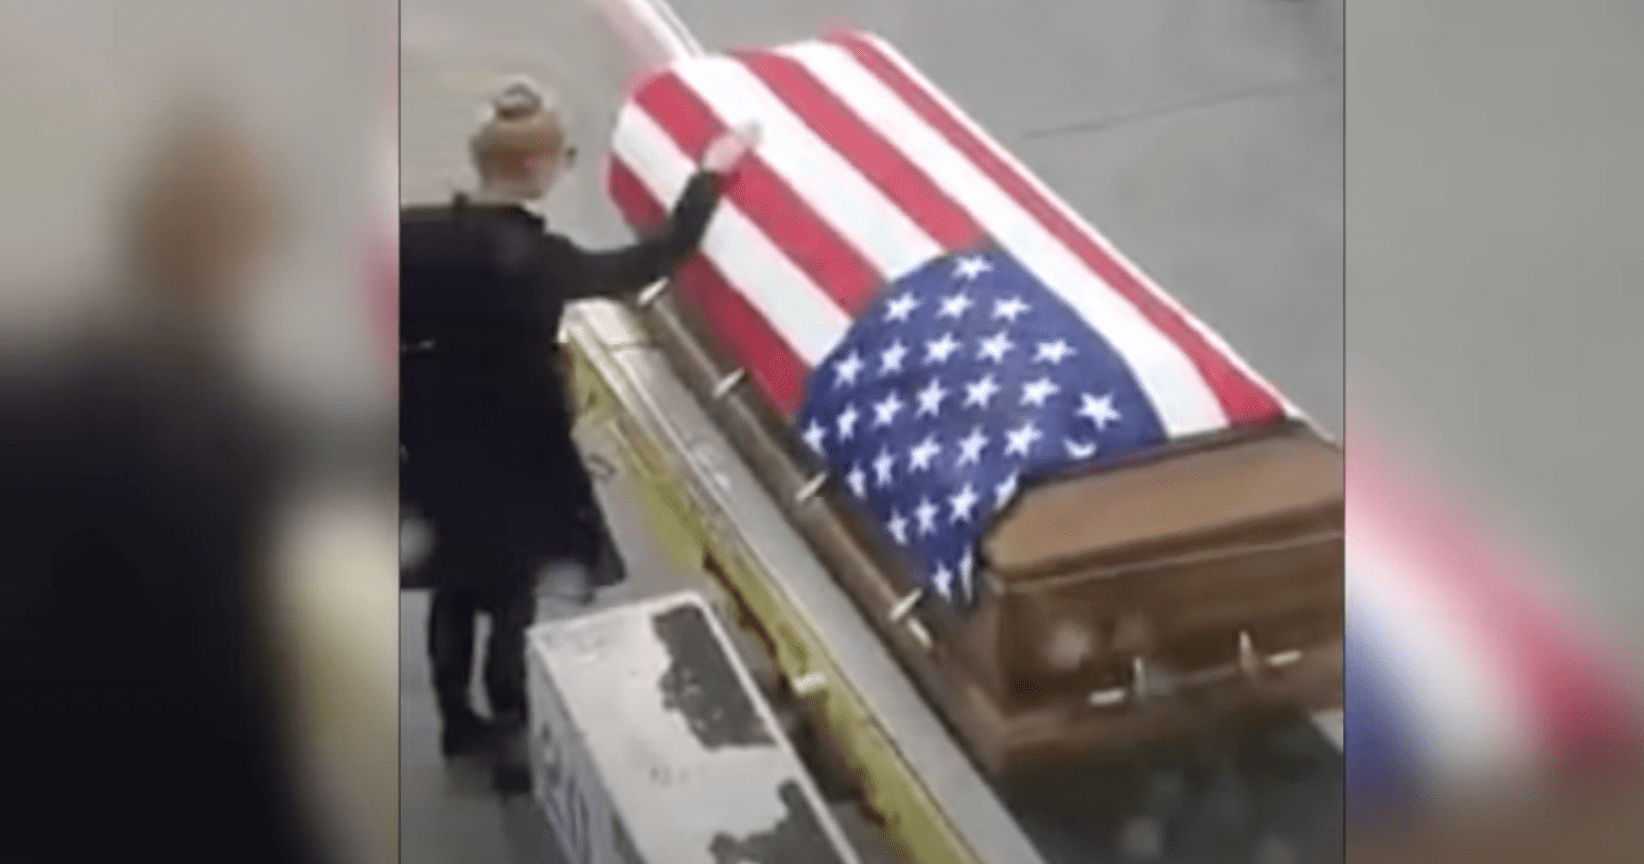 Tara Thomas places her hand on the flag-draped coffin. | Source: YouTube.com/Inside Edition